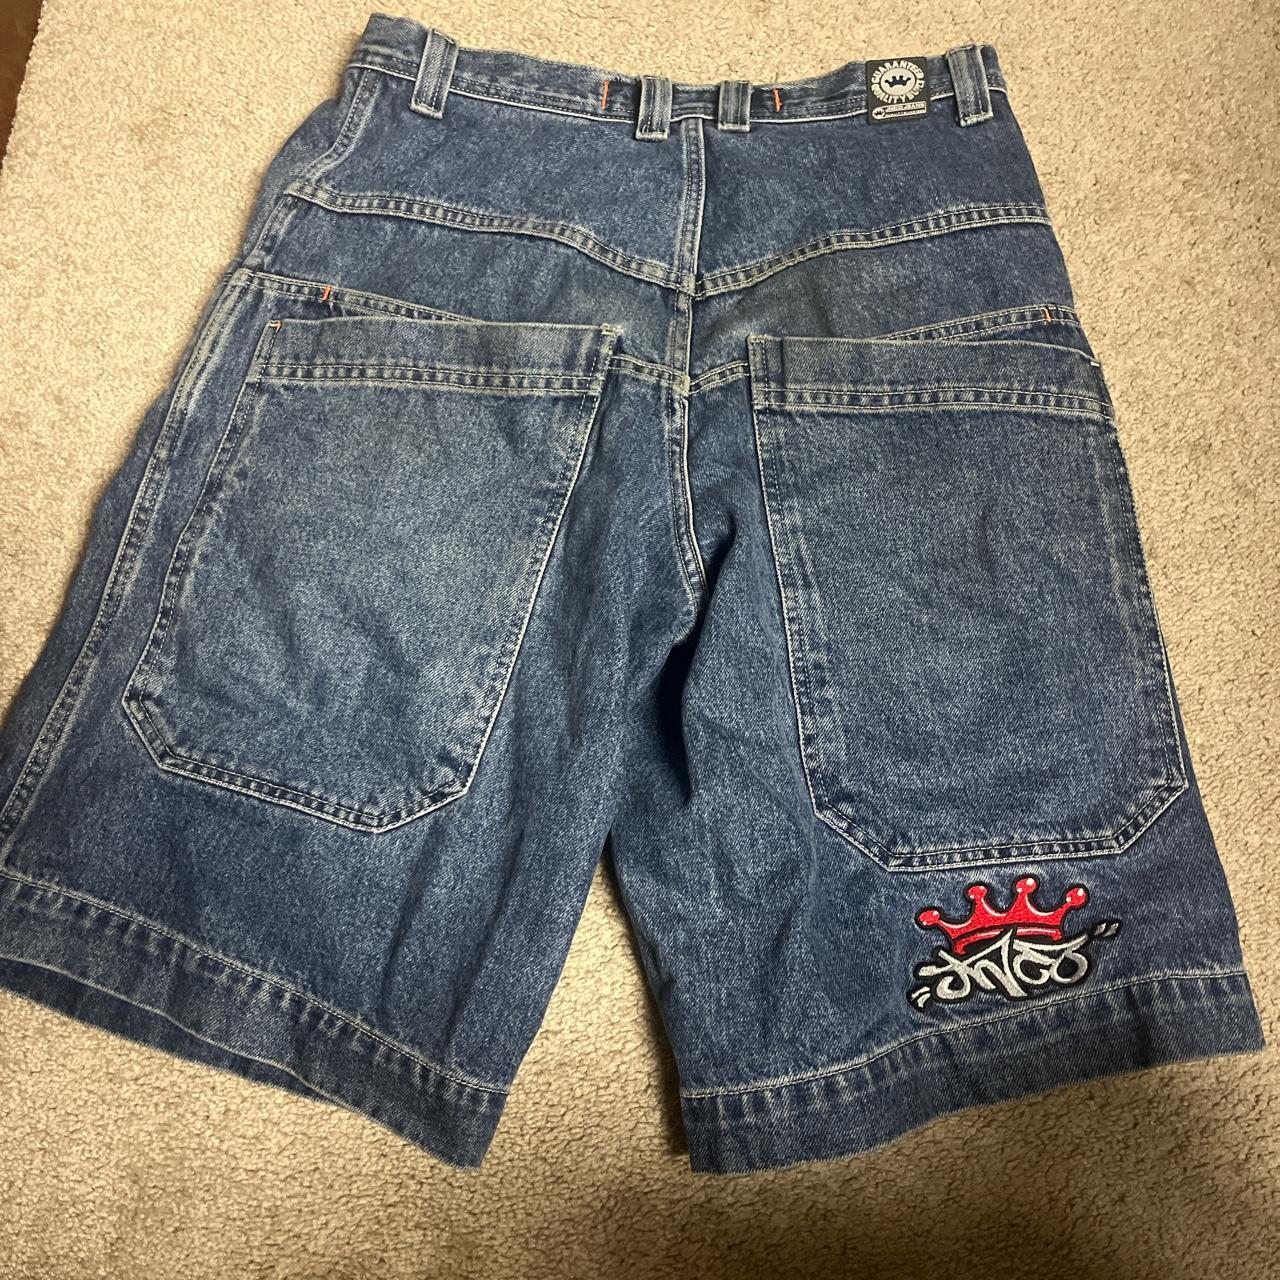 Jnco jeans jorts tribals size 33 open to offers - Depop